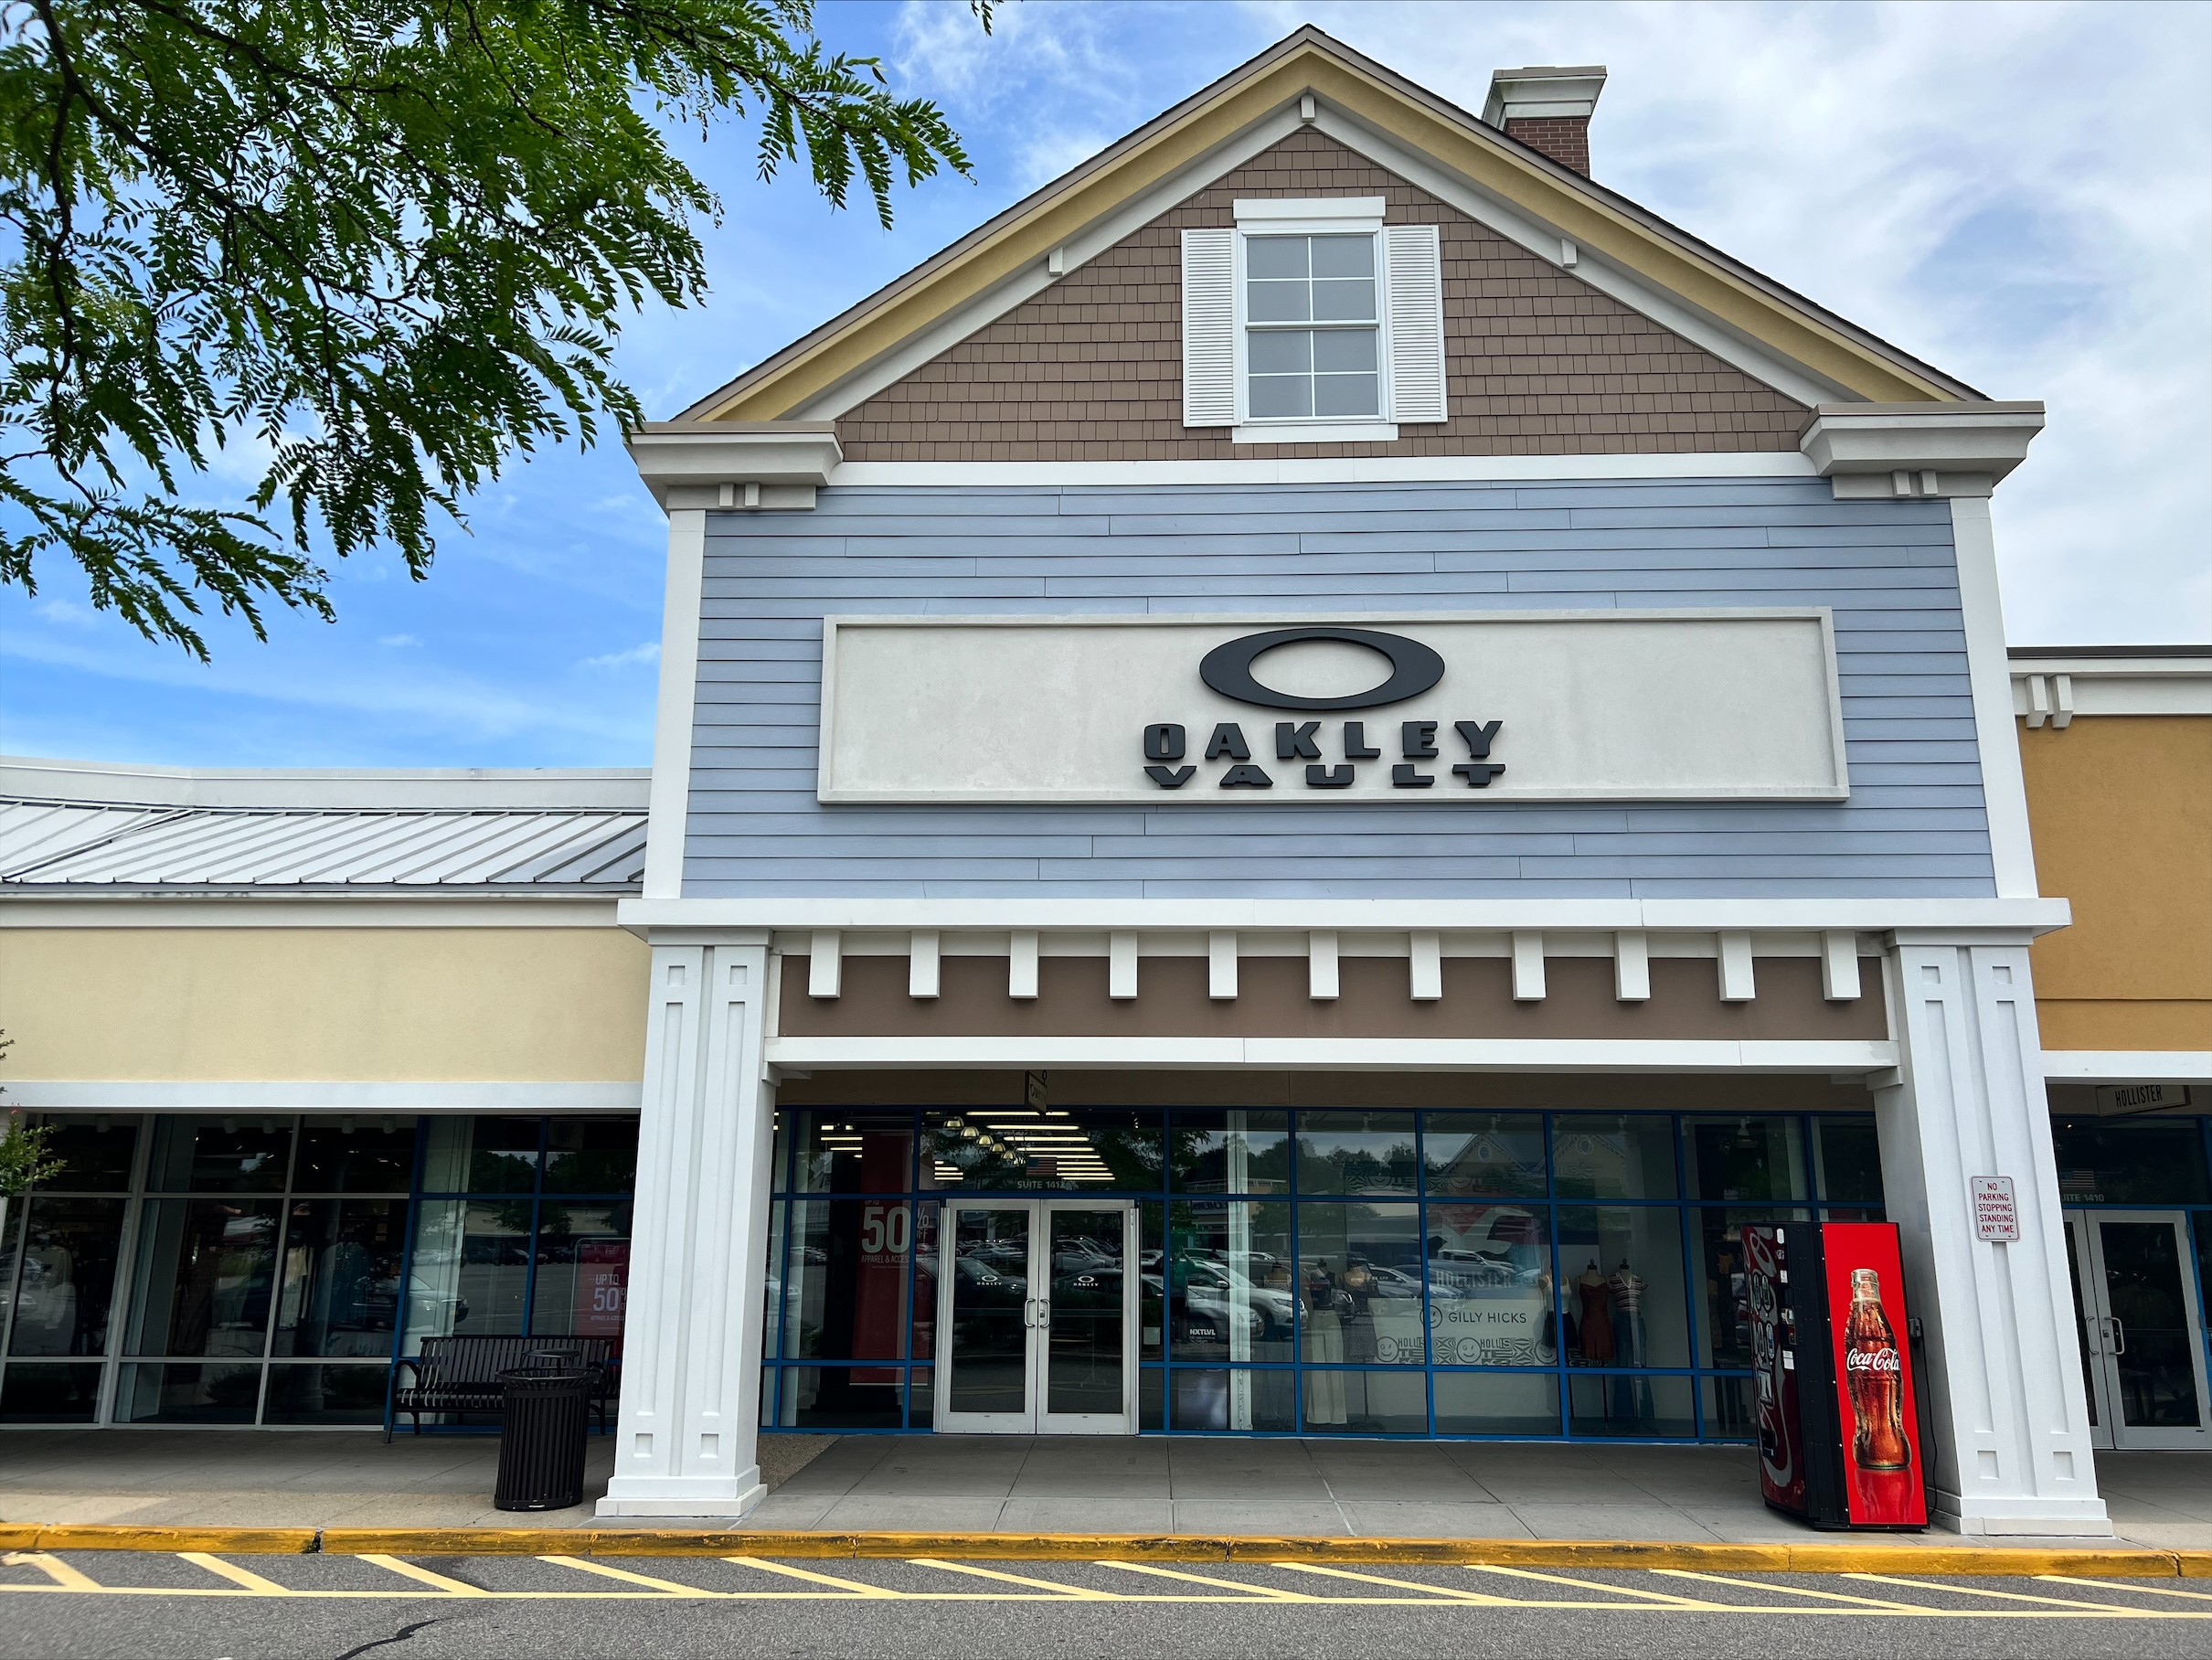 Oakley Vault, 1412 Tanger Mall Dr, Tanger Outlets Riverhead, Riverhead, NY, Clothing Retail MapQuest